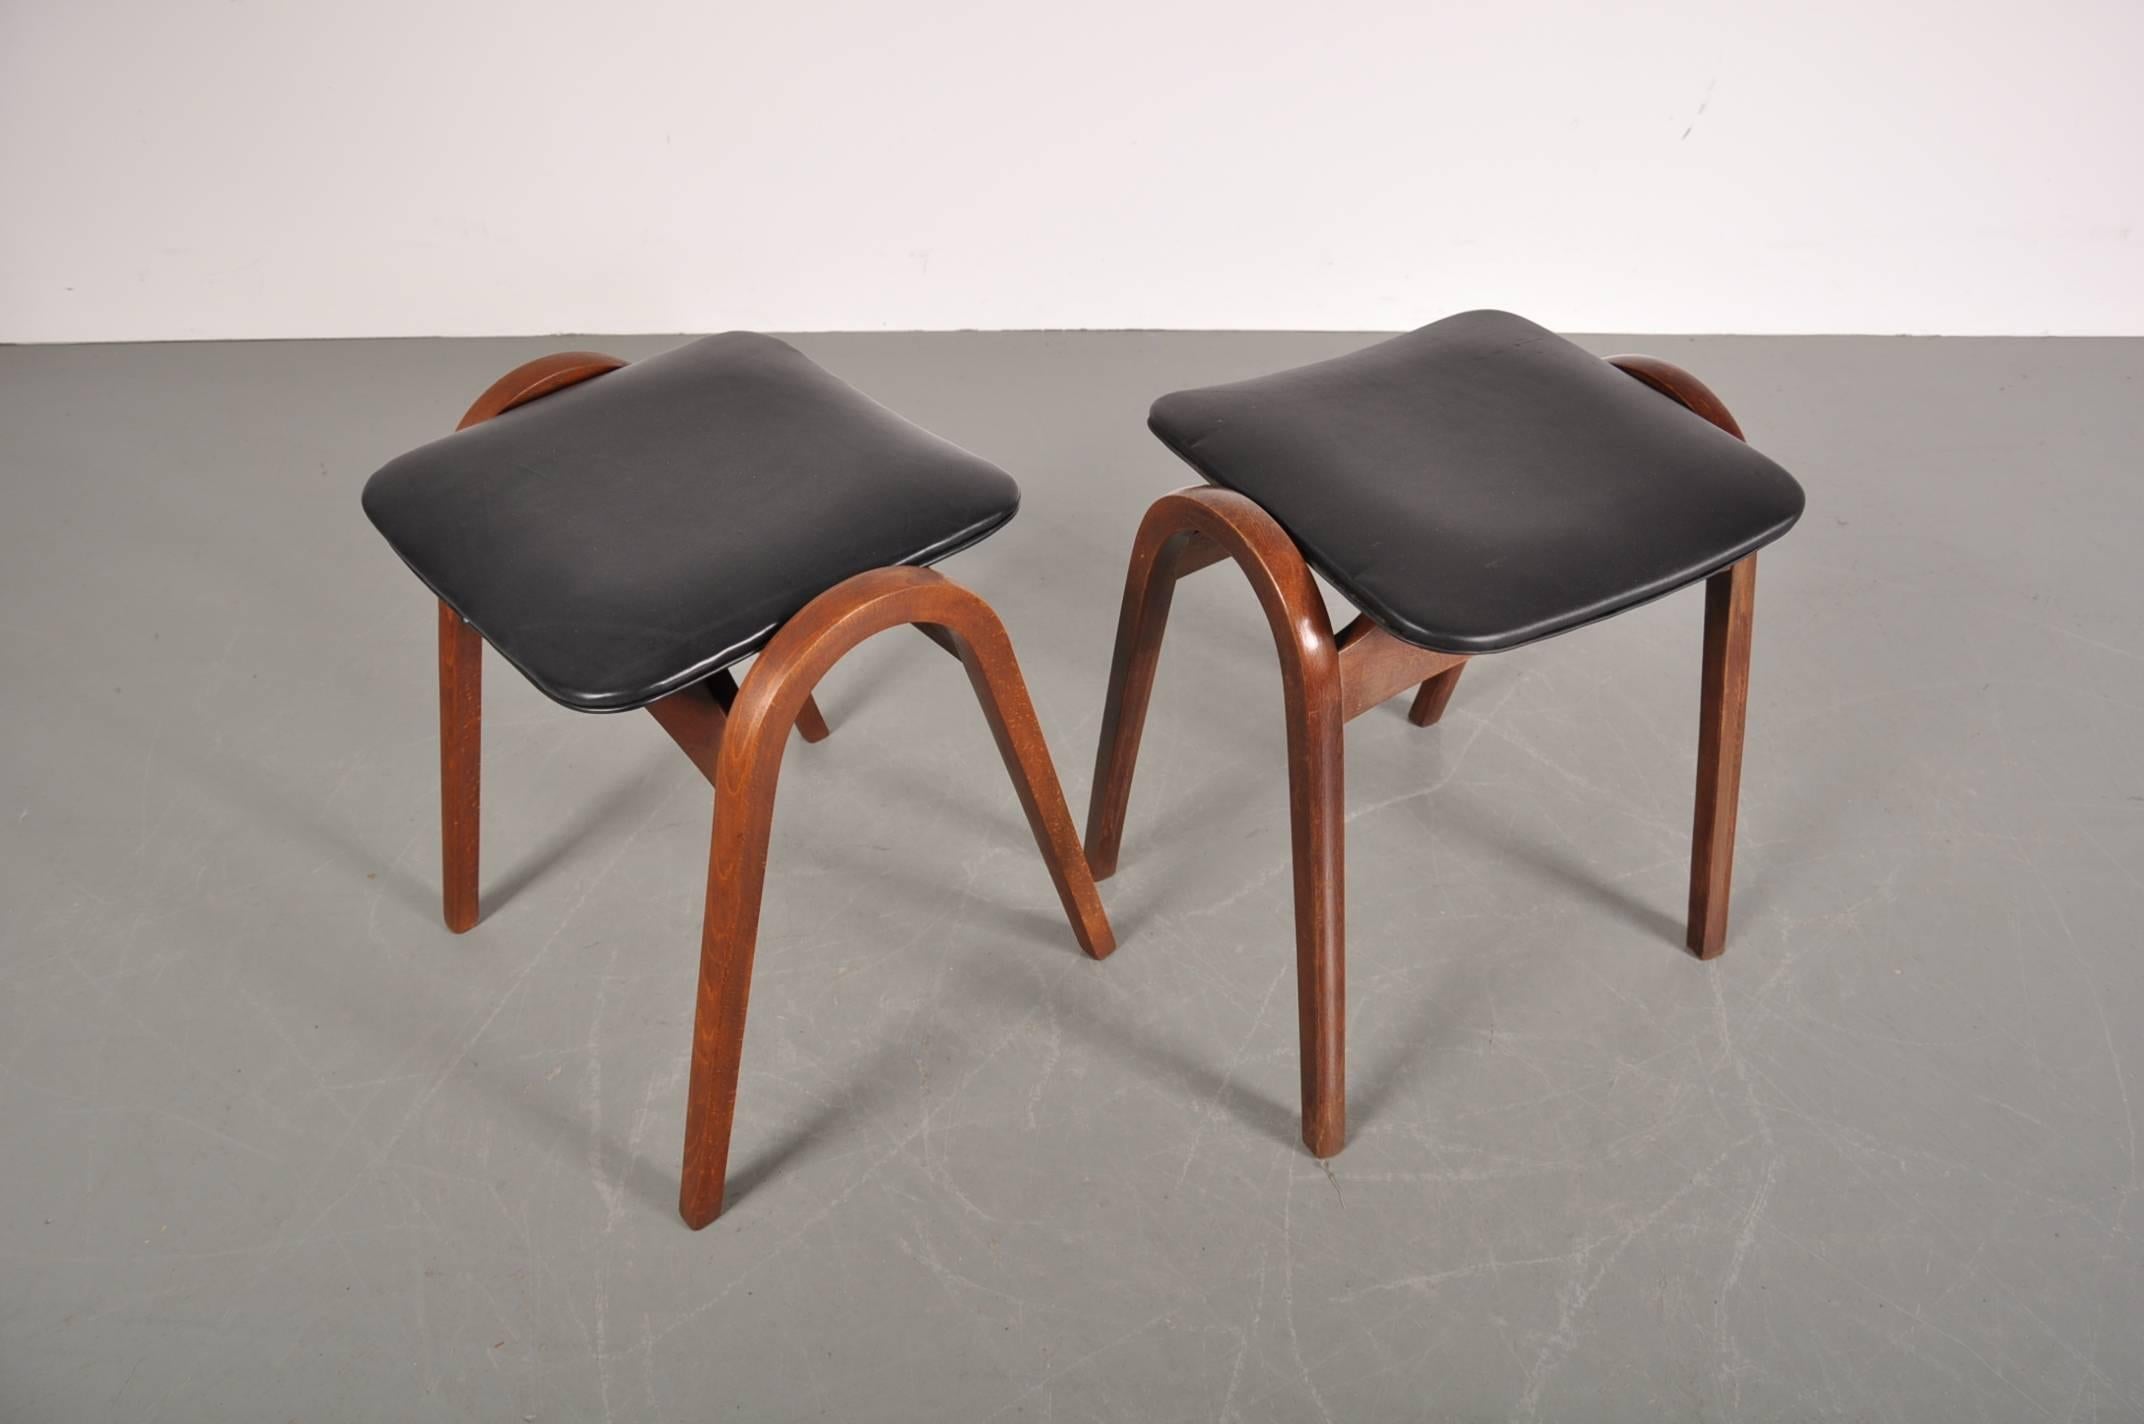 Mid-Century Modern Stacking Stools by Isamu Kenmochi for Tendo, Japan 1958